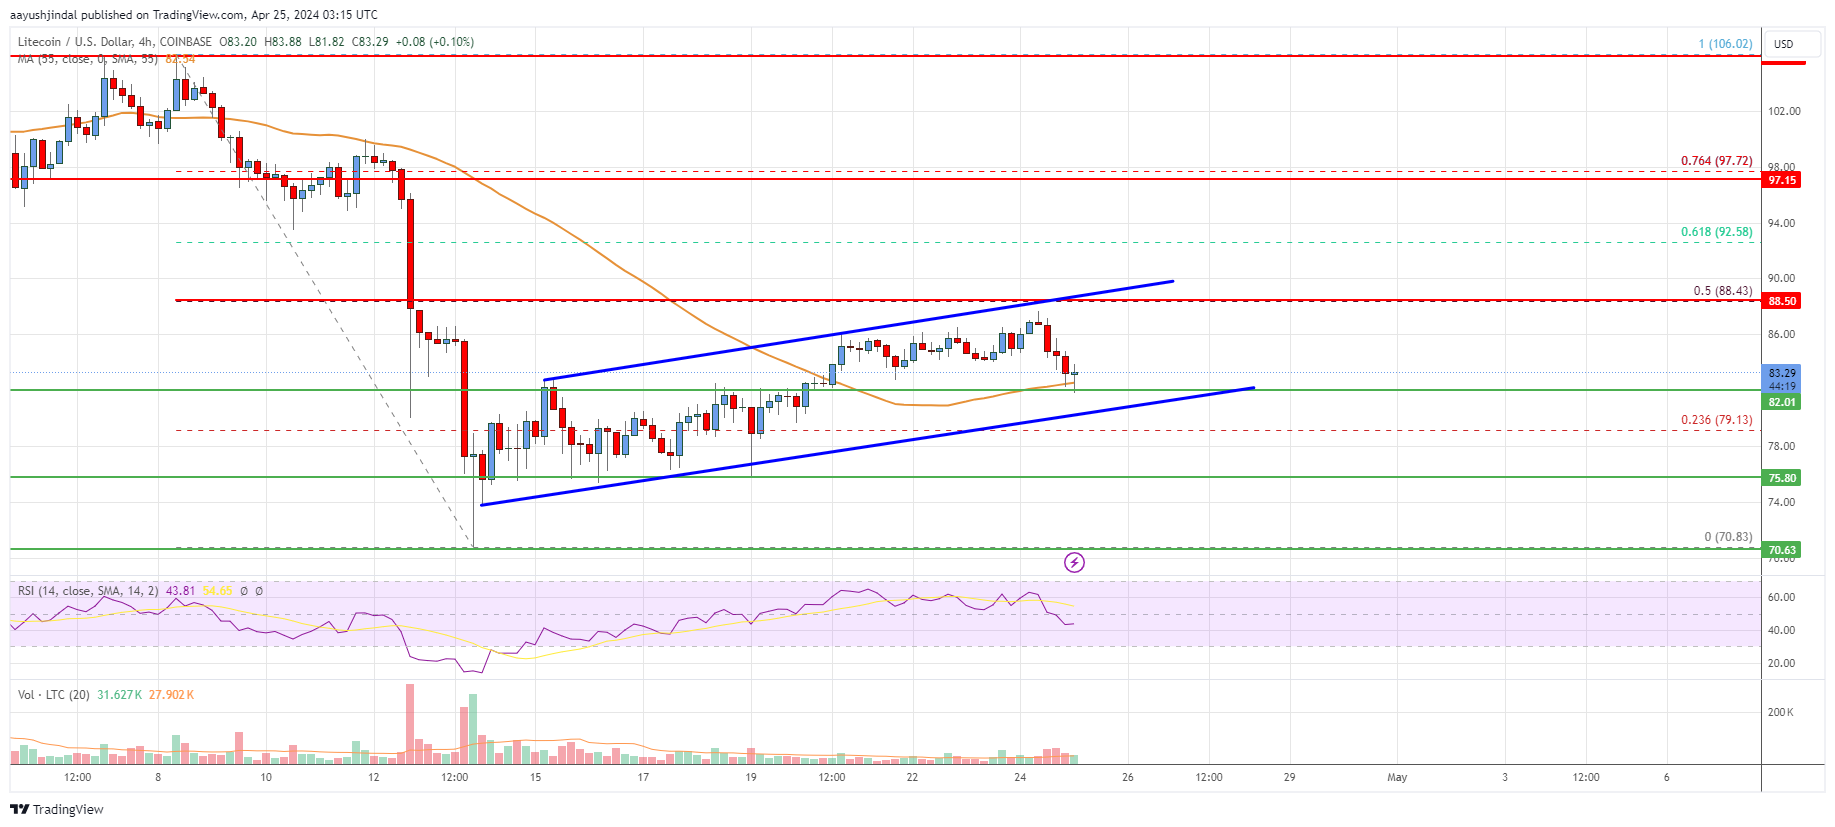 Litecoin (LTC) Price Analysis: Can Bulls Hold This Key Support?